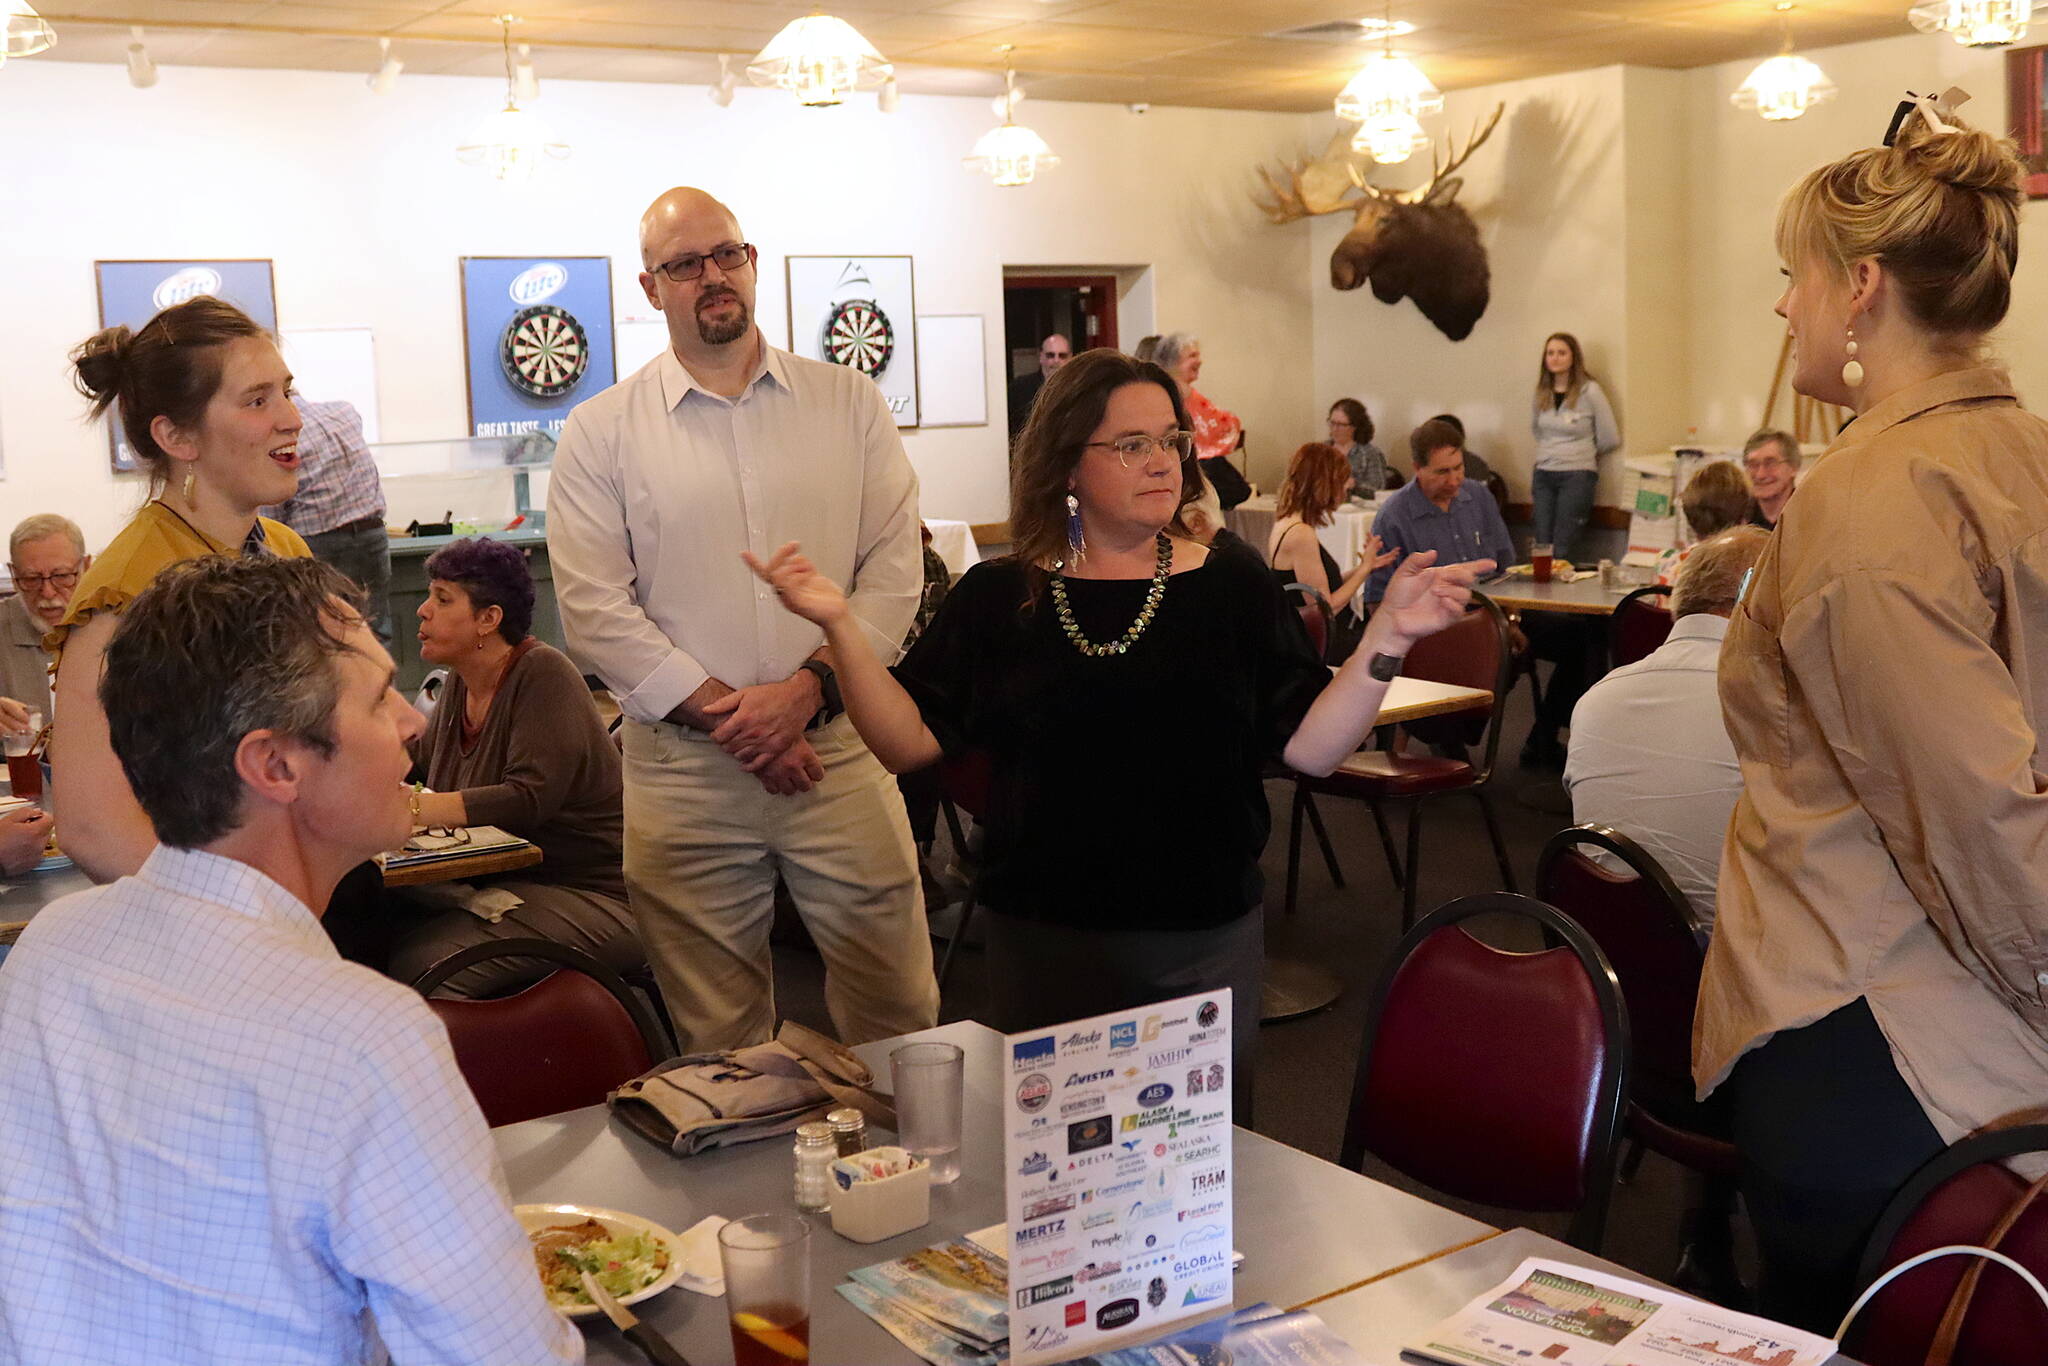 Meilani Schijvens (center), owner of Rain Coast Data, talks with attendees at a Juneau Chamber of Commerce luncheon on Thursday before presenting results from an annual economic survey by her company. (Mark Sabbatini / Juneau Empire)